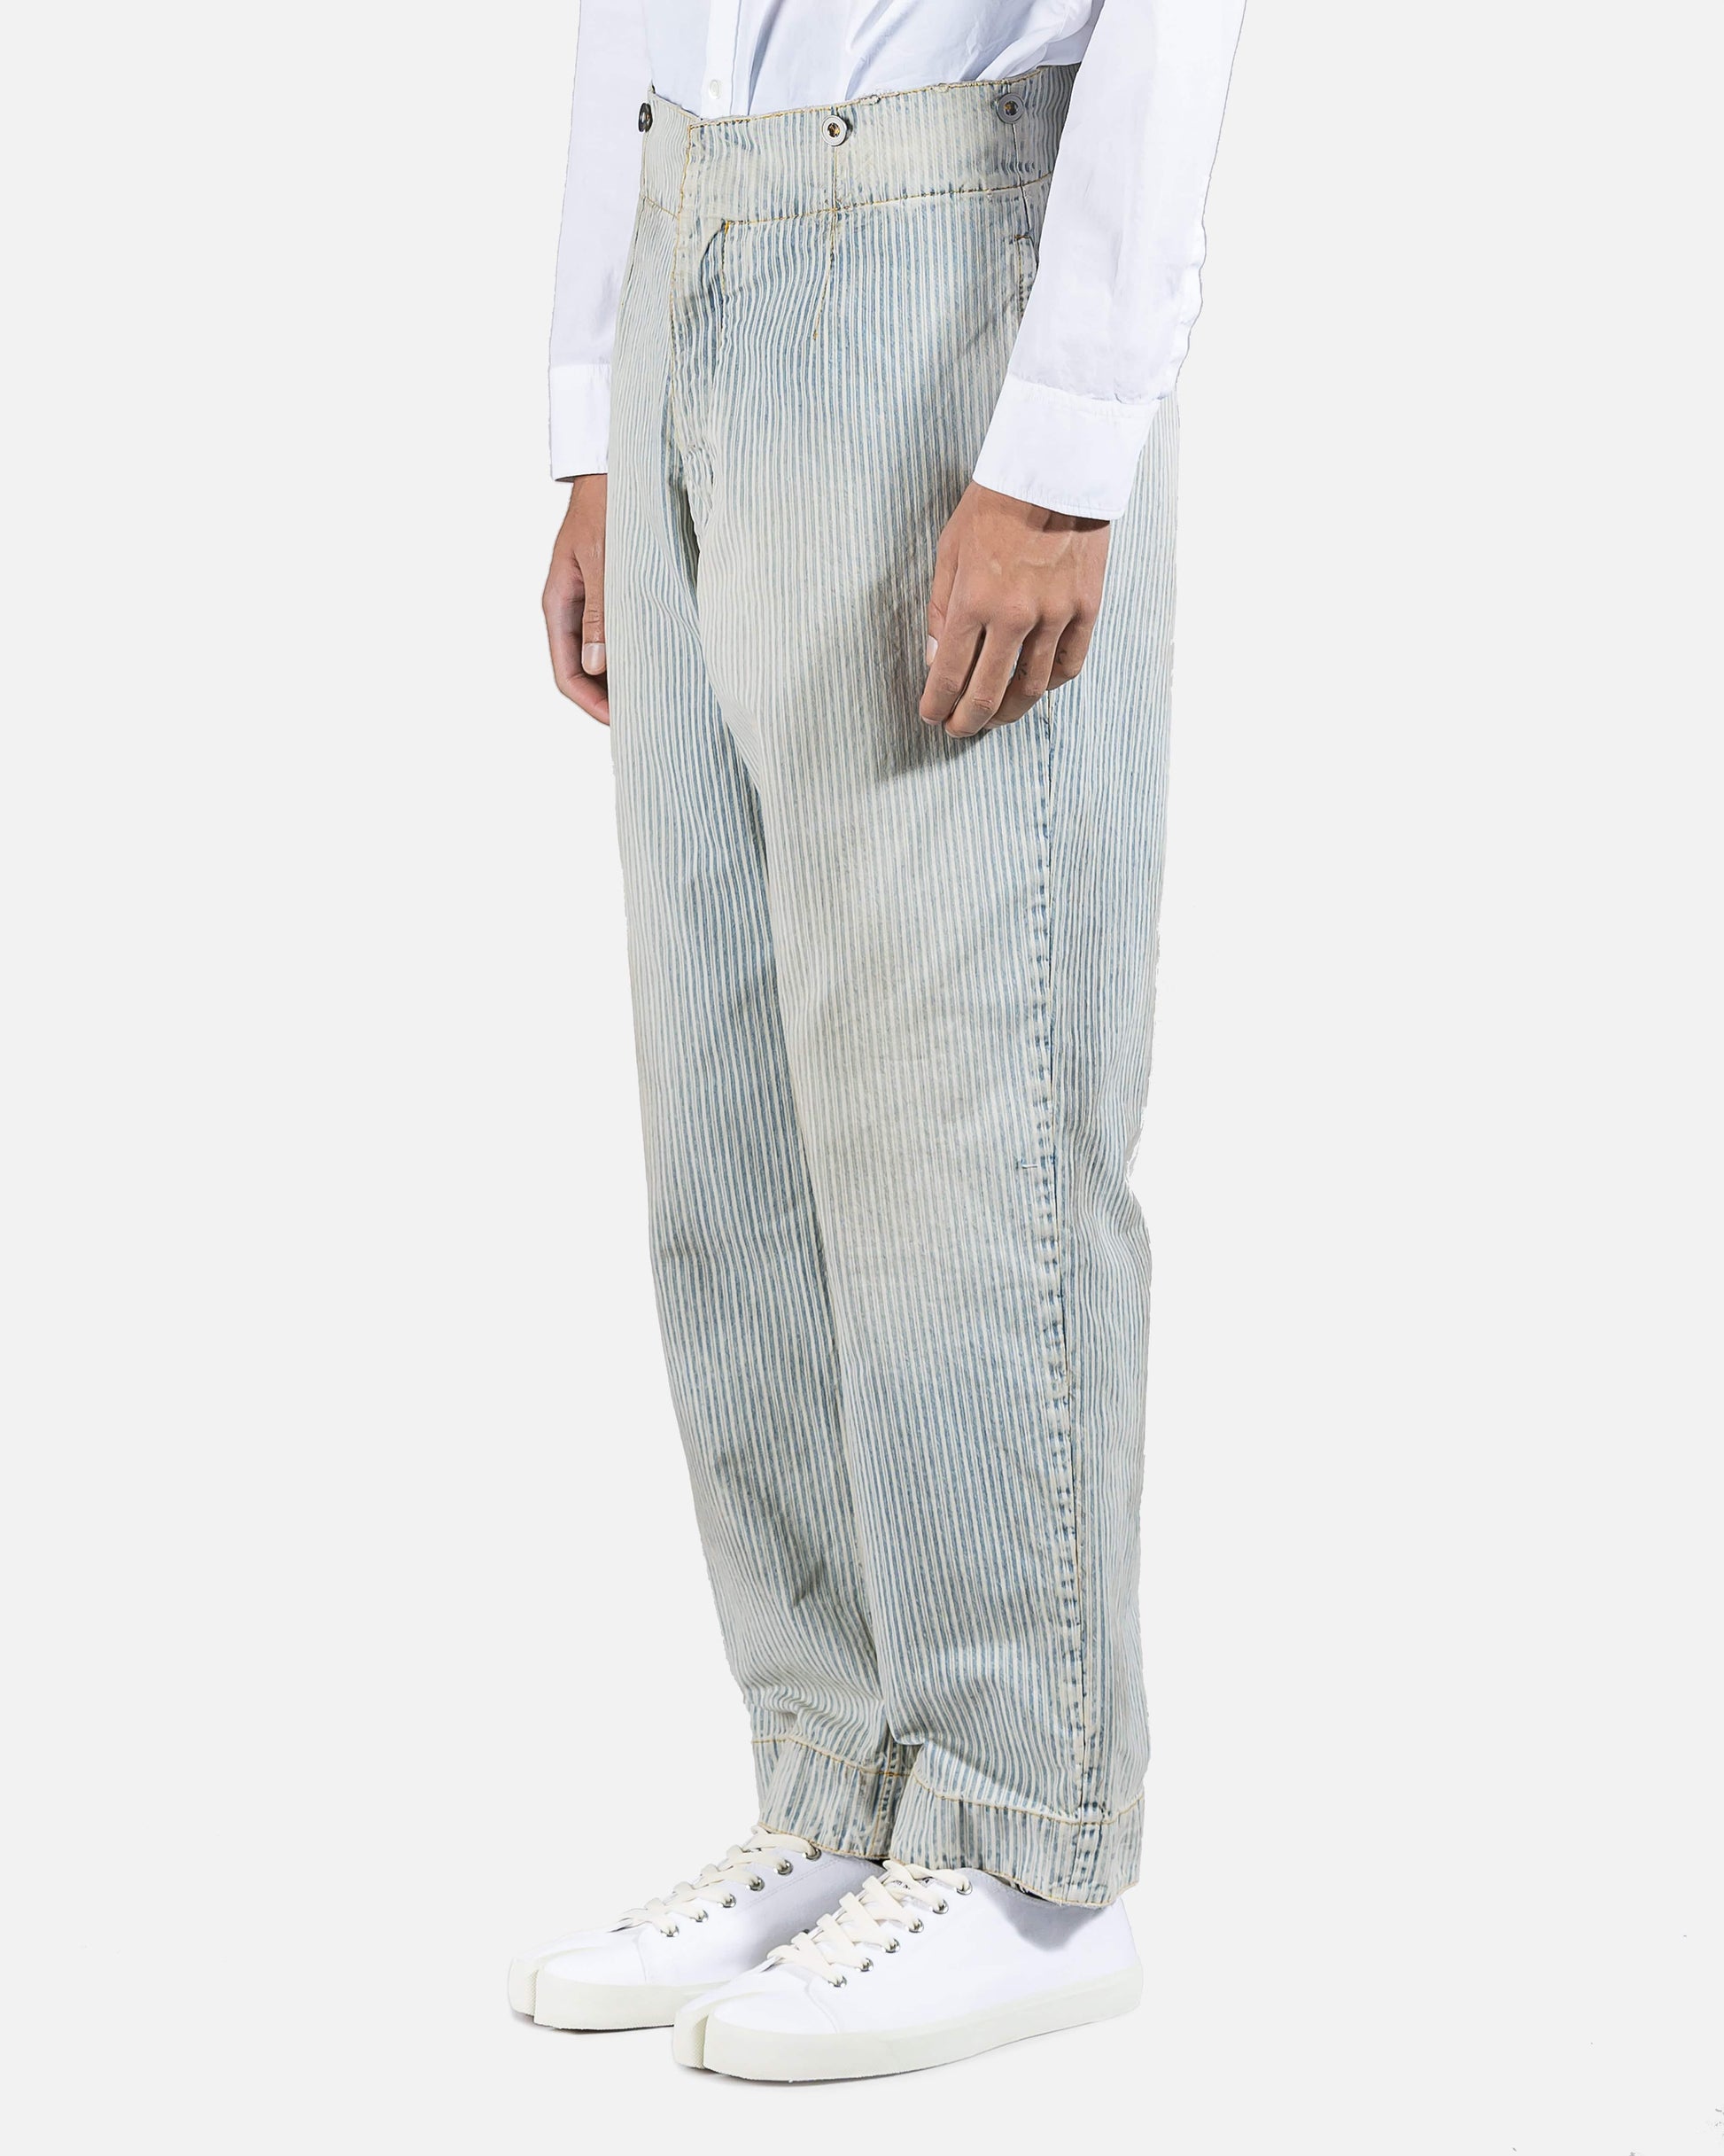 Maison Margiela Men's Pants Striped Aged Trousers in White